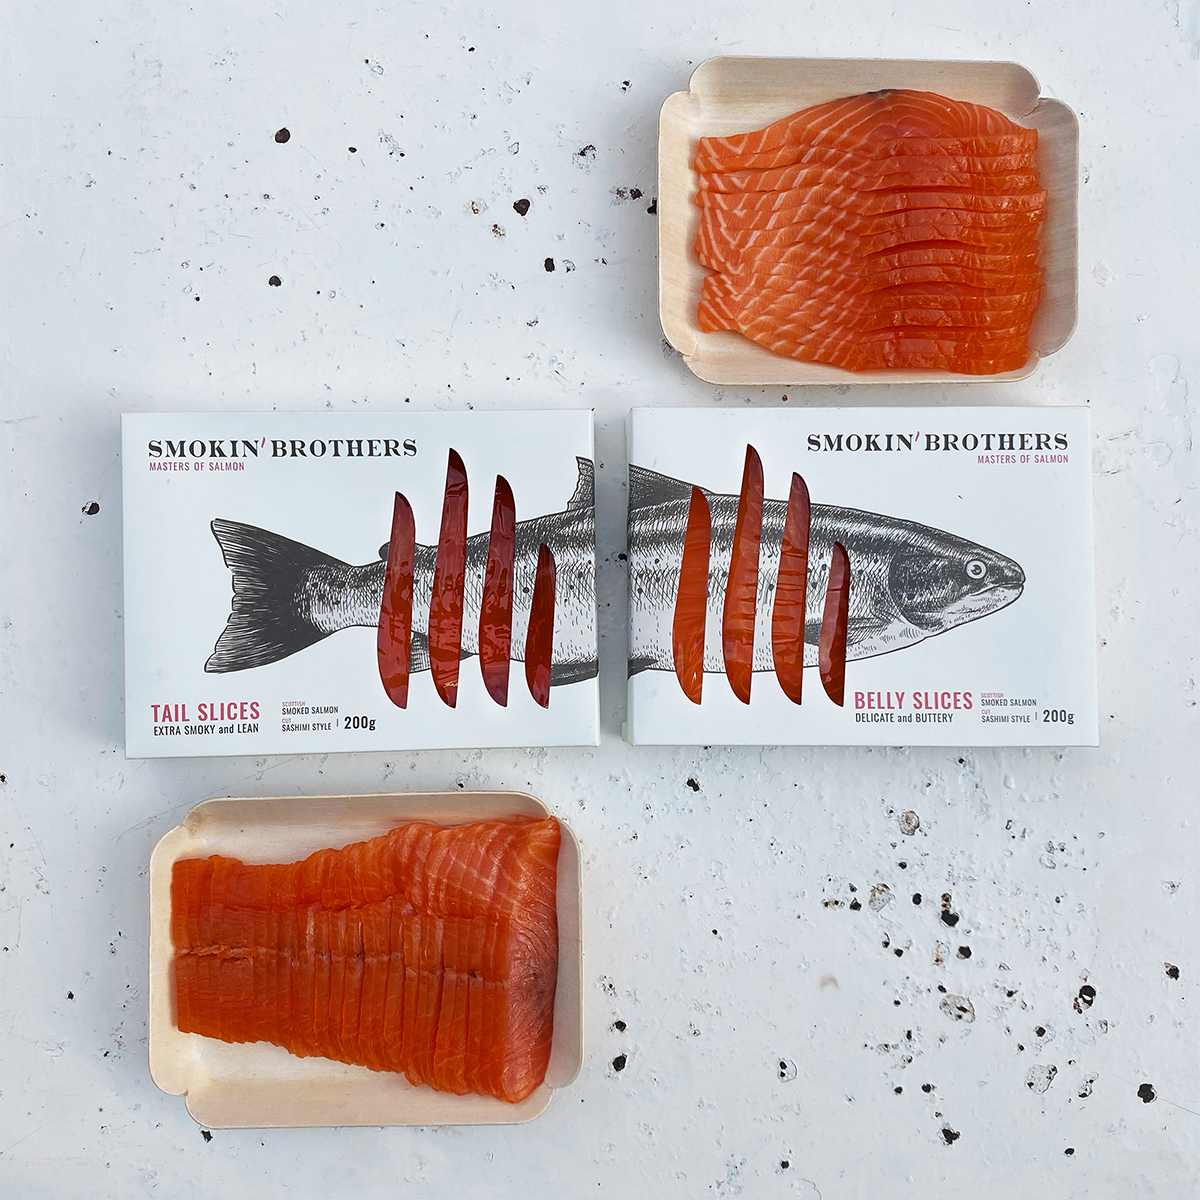 Why Design matters, even for a smoked salmon brand.